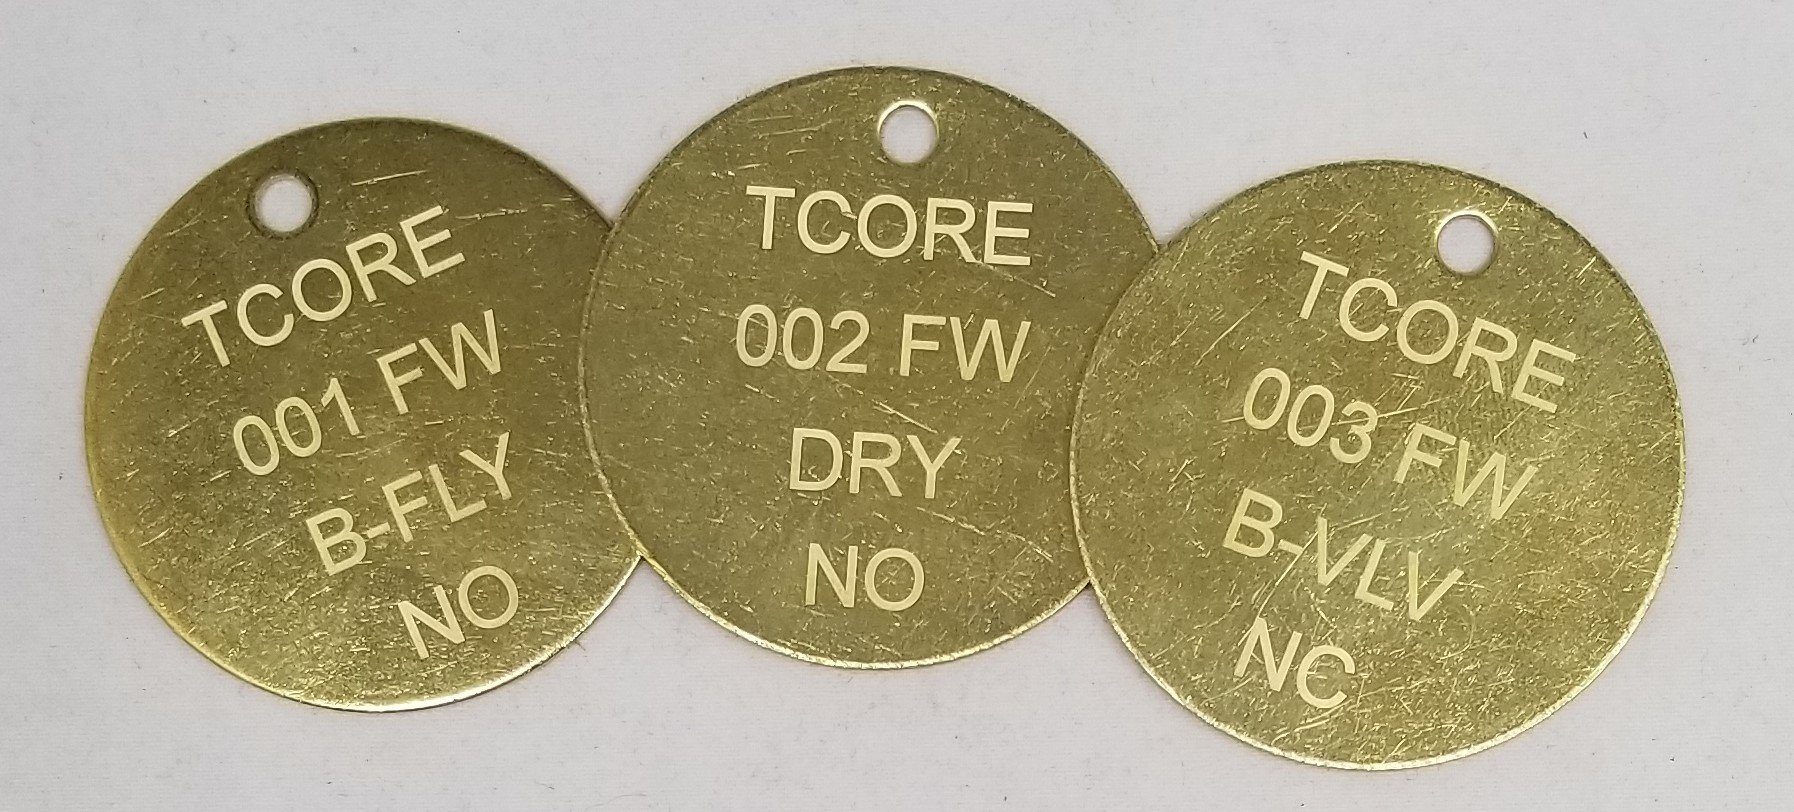 Brass Identification/Equipment Tags, Laser Marked 2" Brass Tags Craftworks NW 